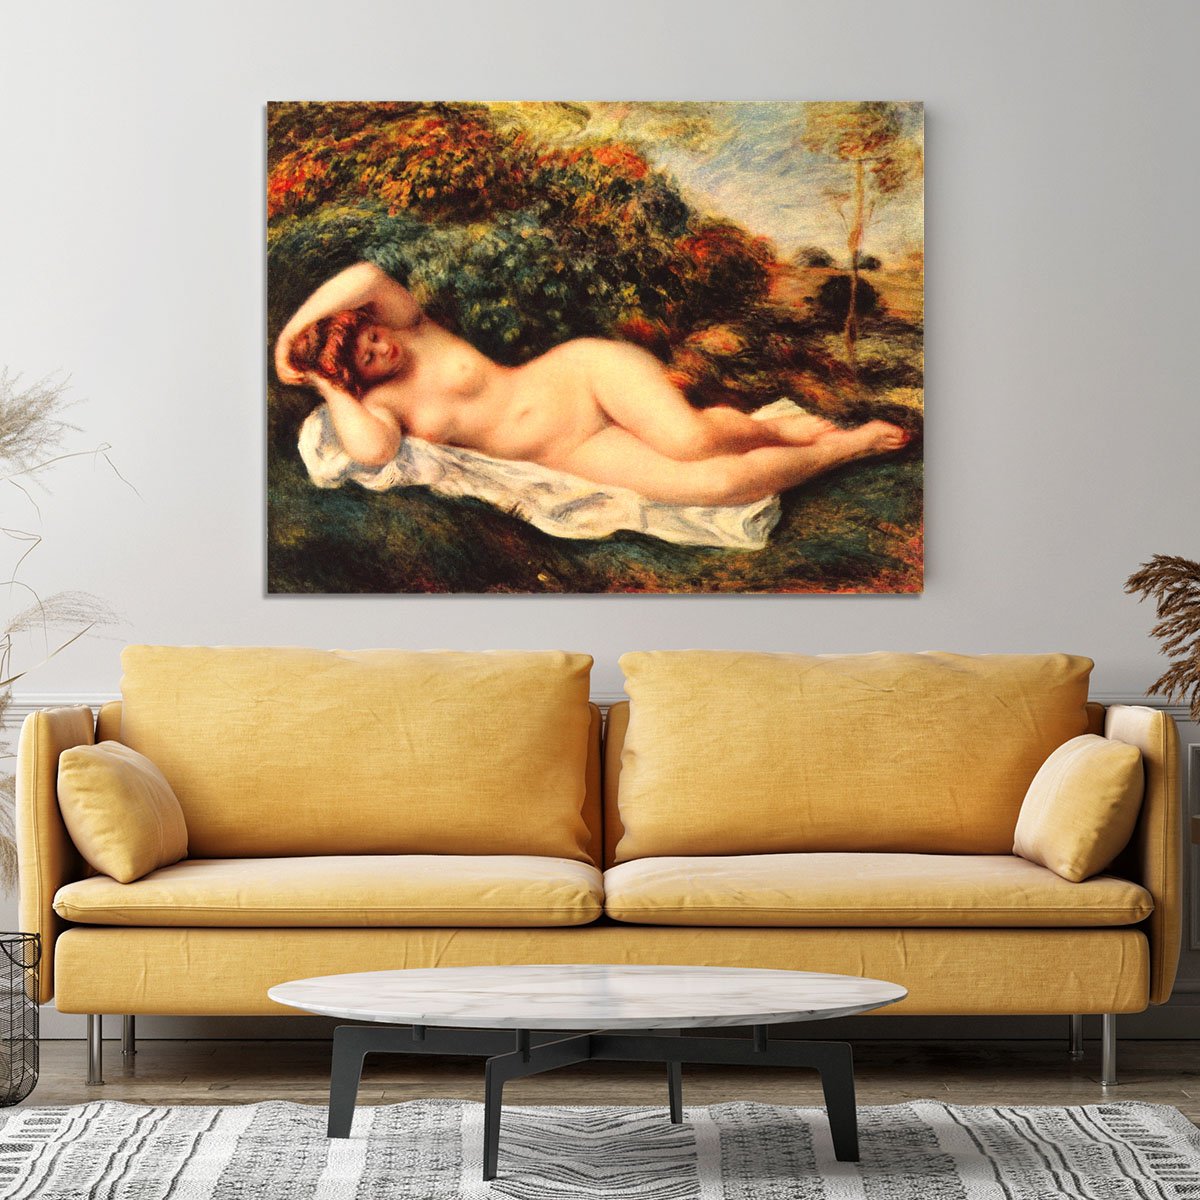 Bathing sleeping the baker by Renoir Canvas Print or Poster